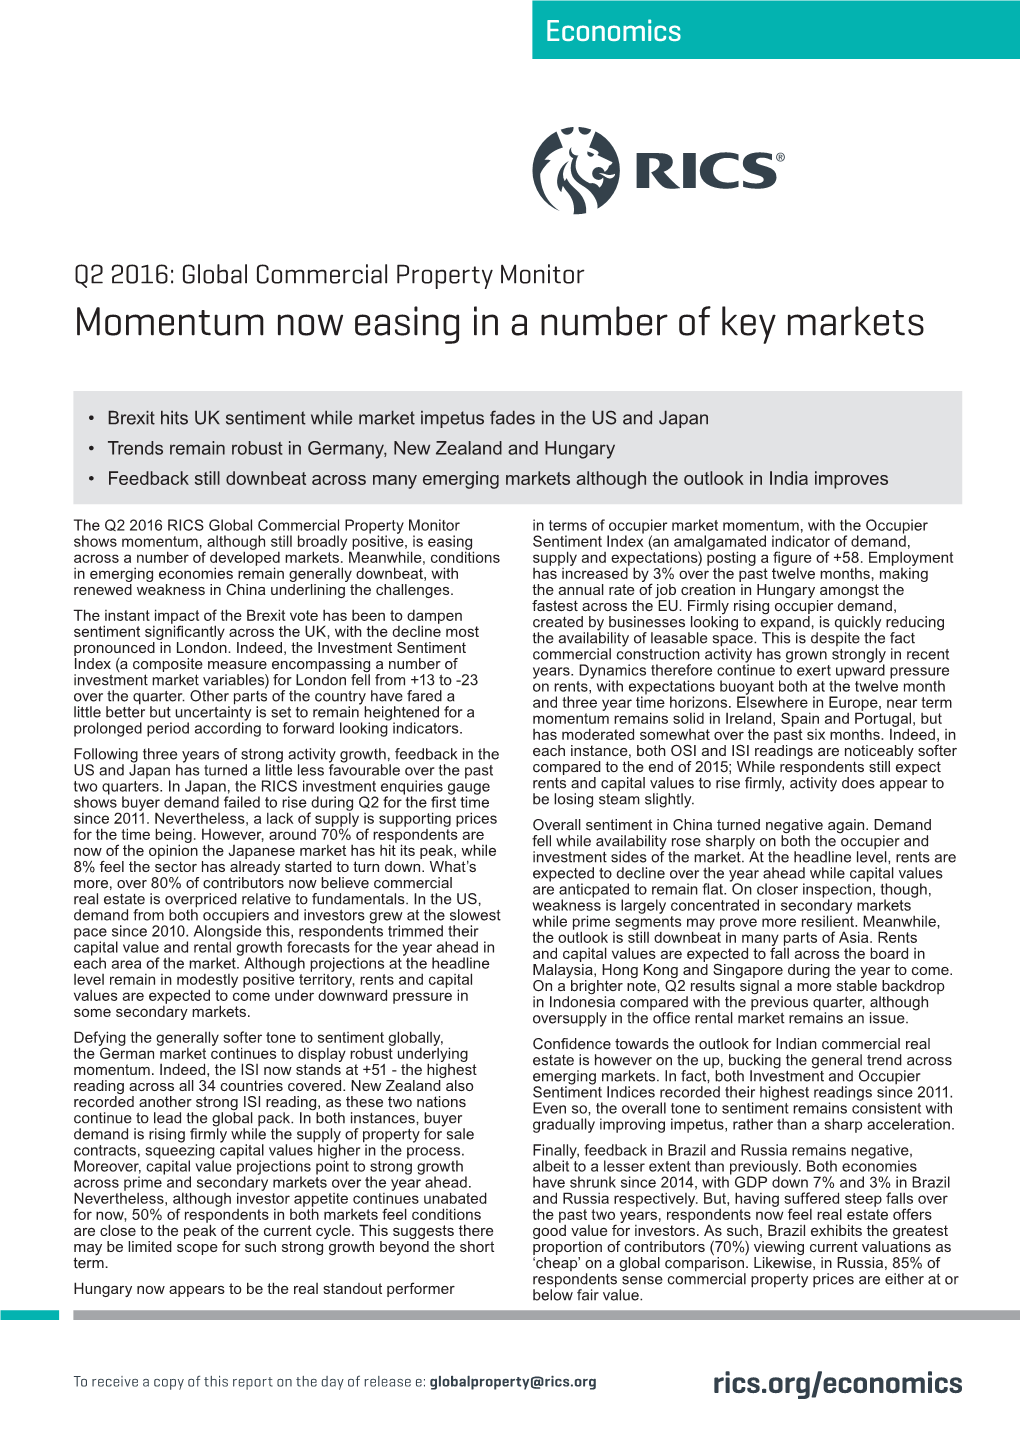 RICS Global Commercial Property Monitor